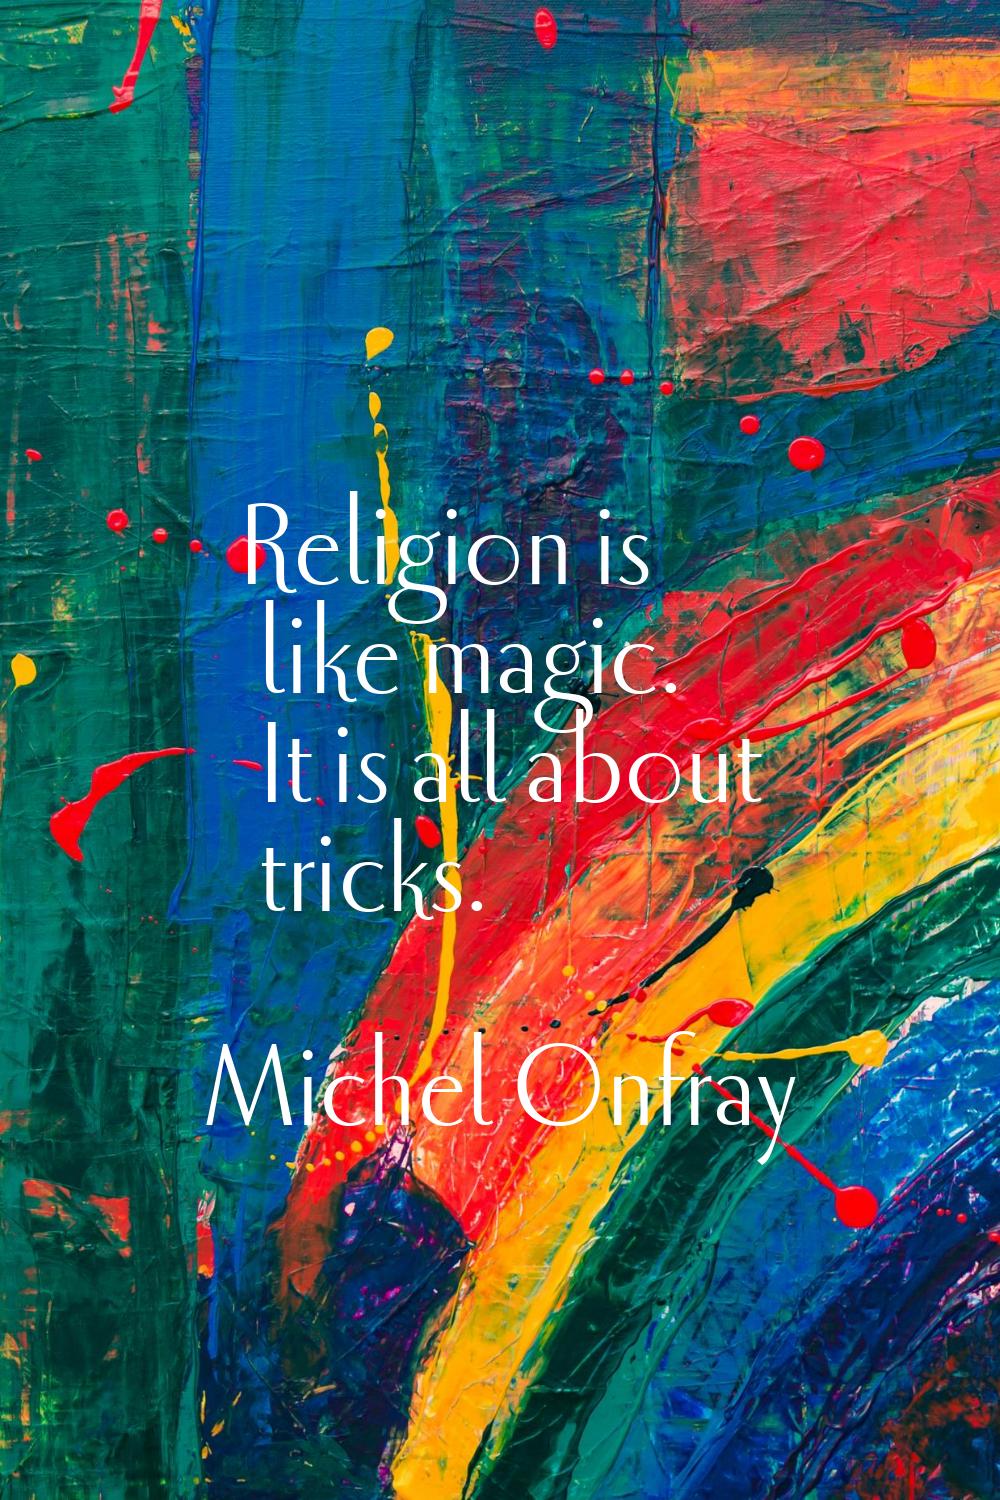 Religion is like magic. It is all about tricks.